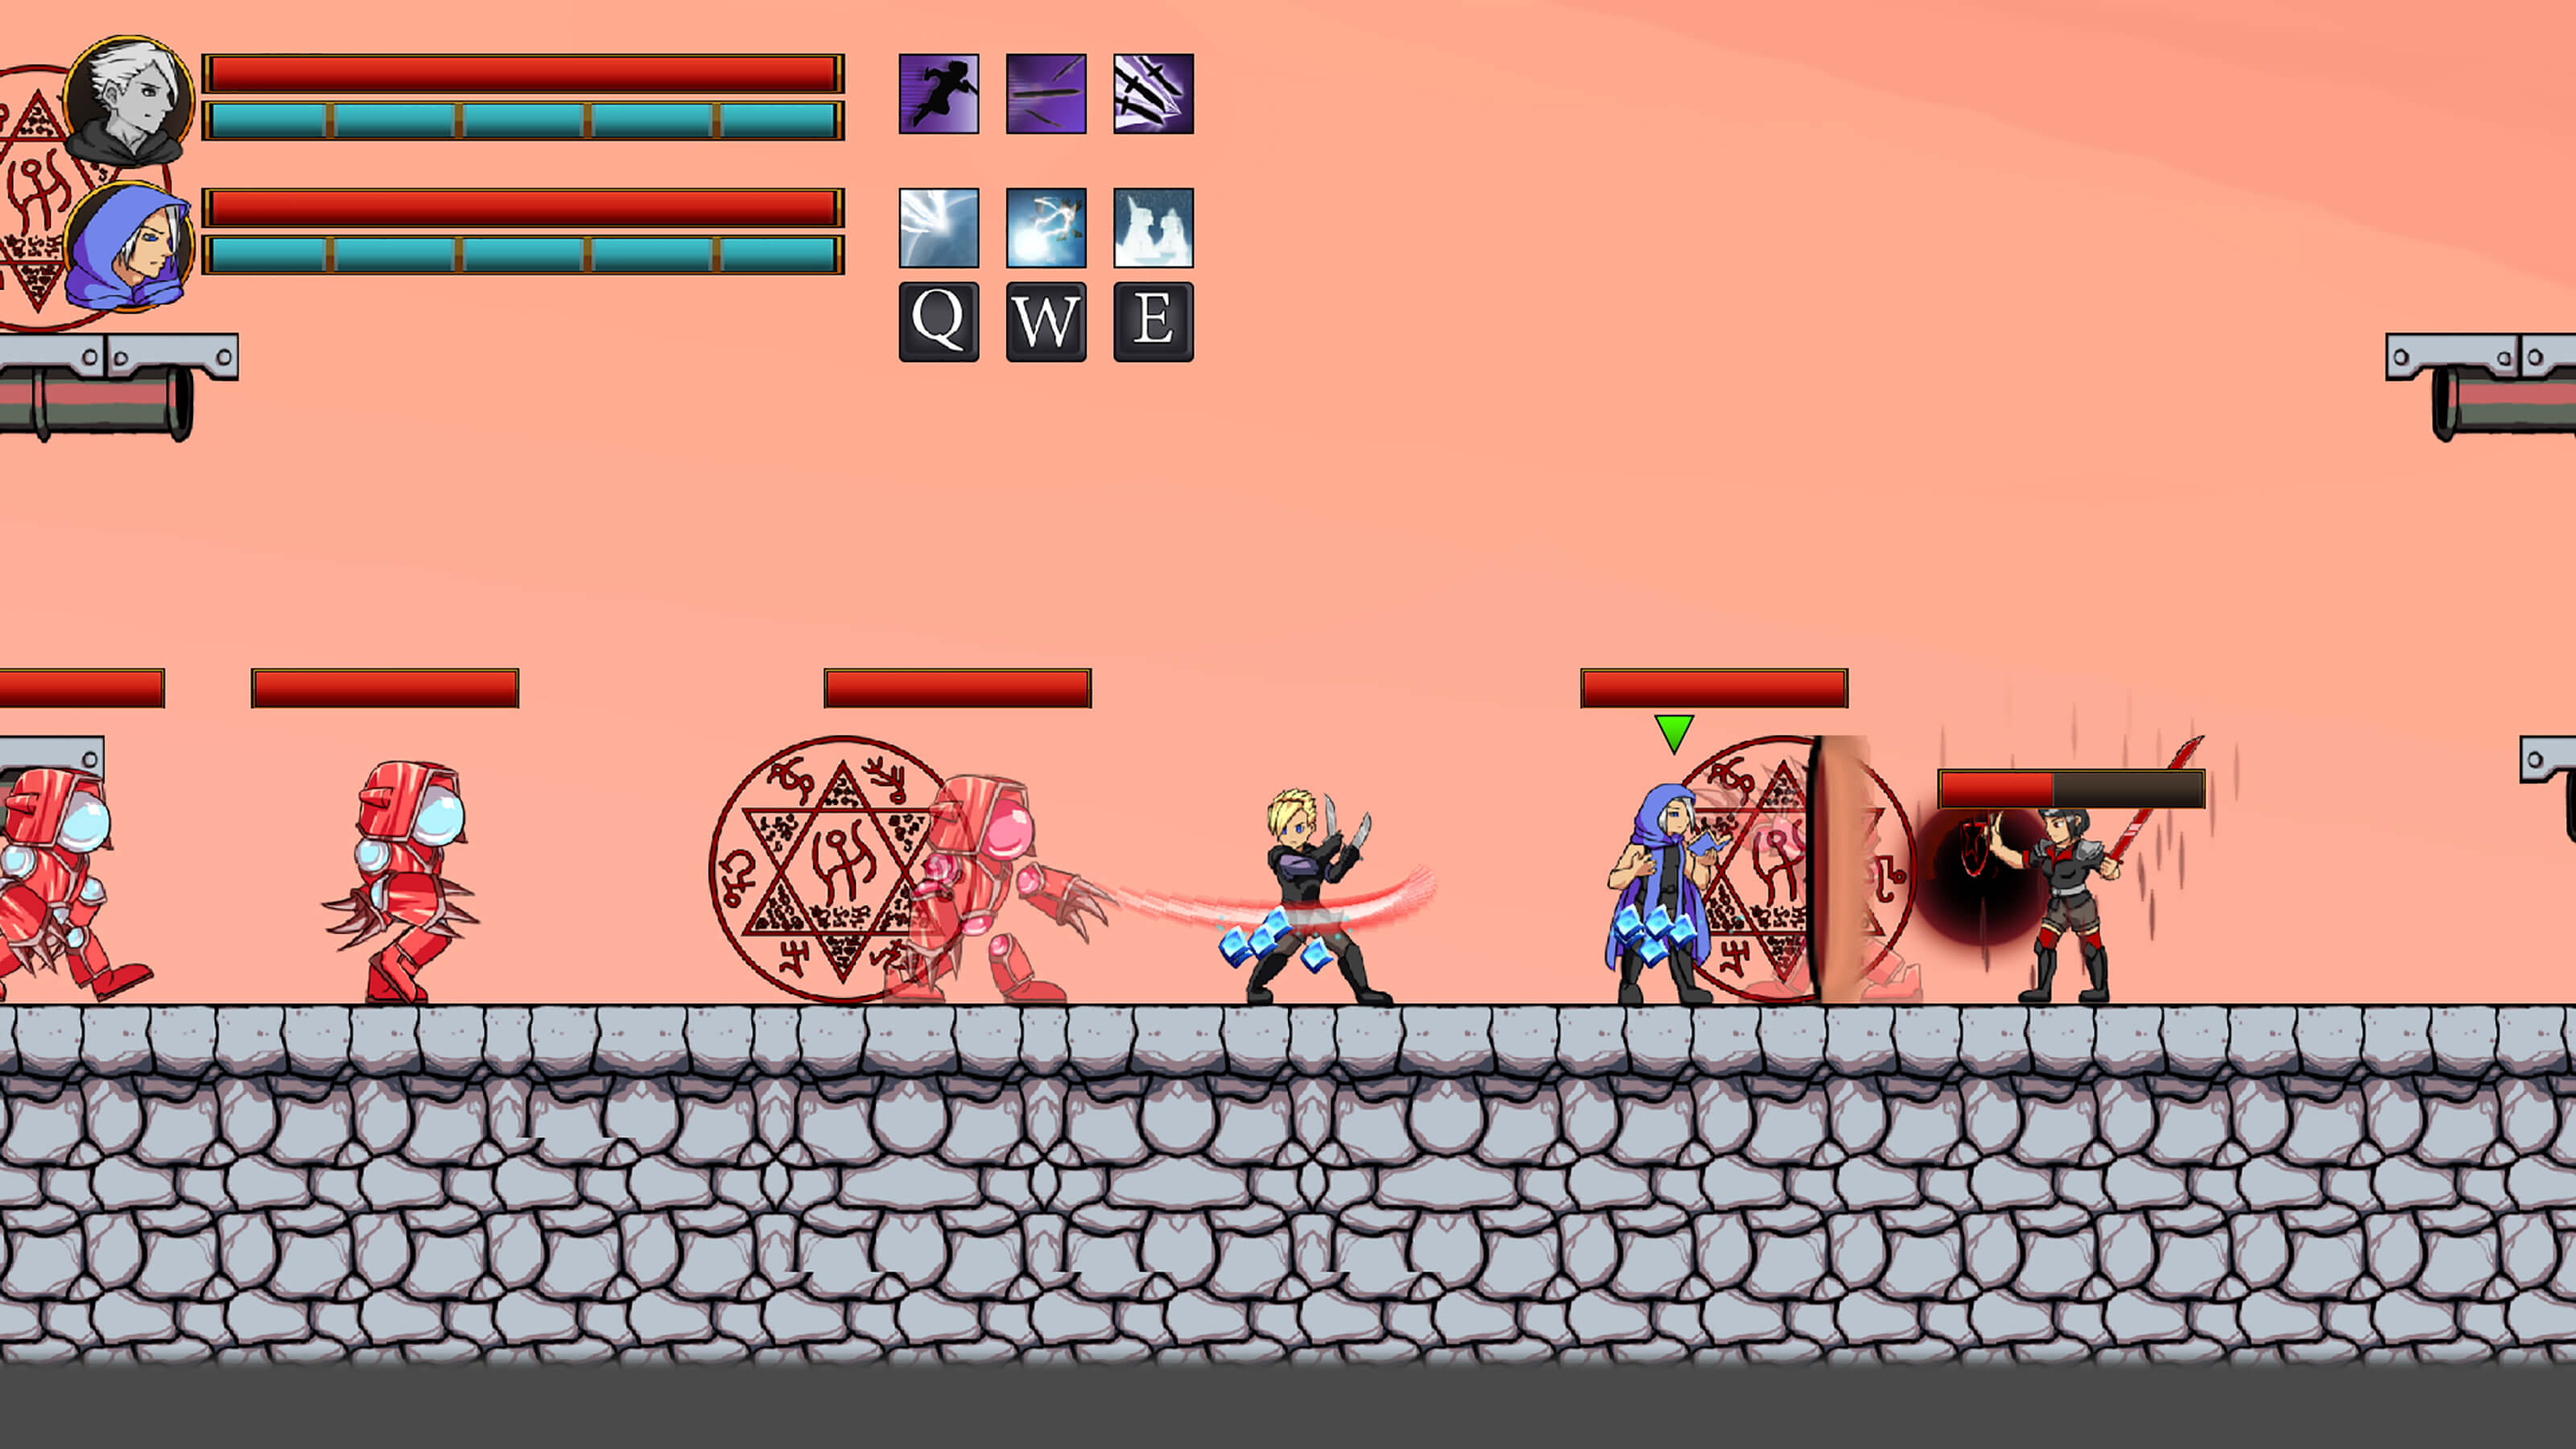 A black-clad thief wielding twin knives and a violet-cloaked mage battle against a wave of 2D enemies on a stone road.